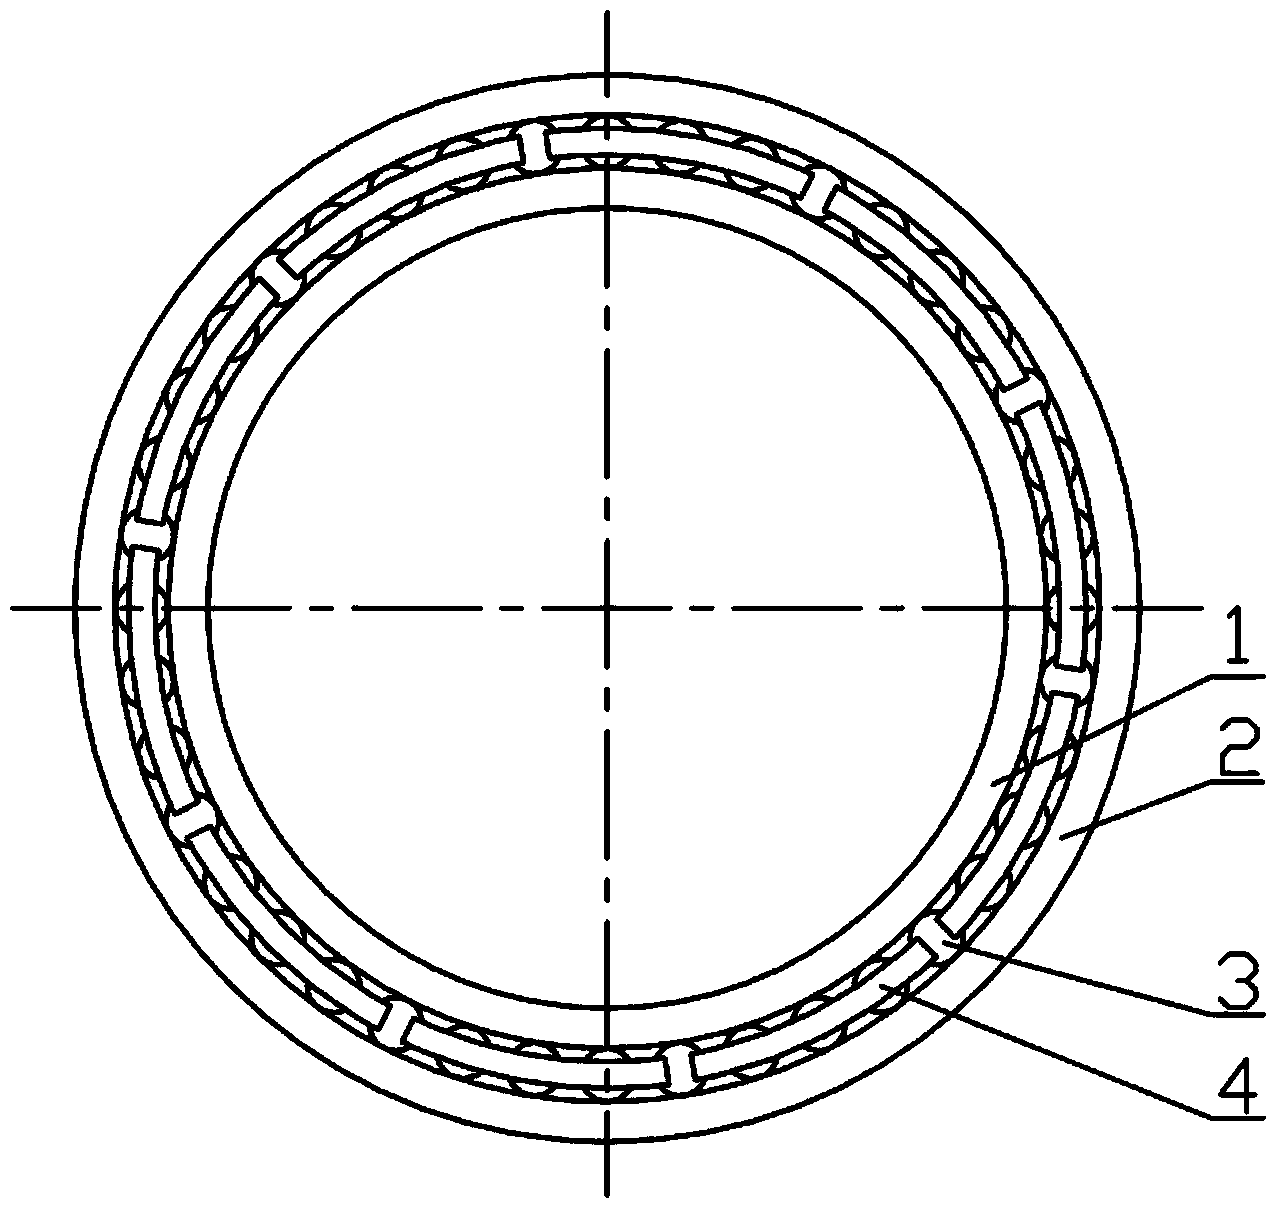 Solid lubrication thin-wall bearing with segmented self-lubricating holder